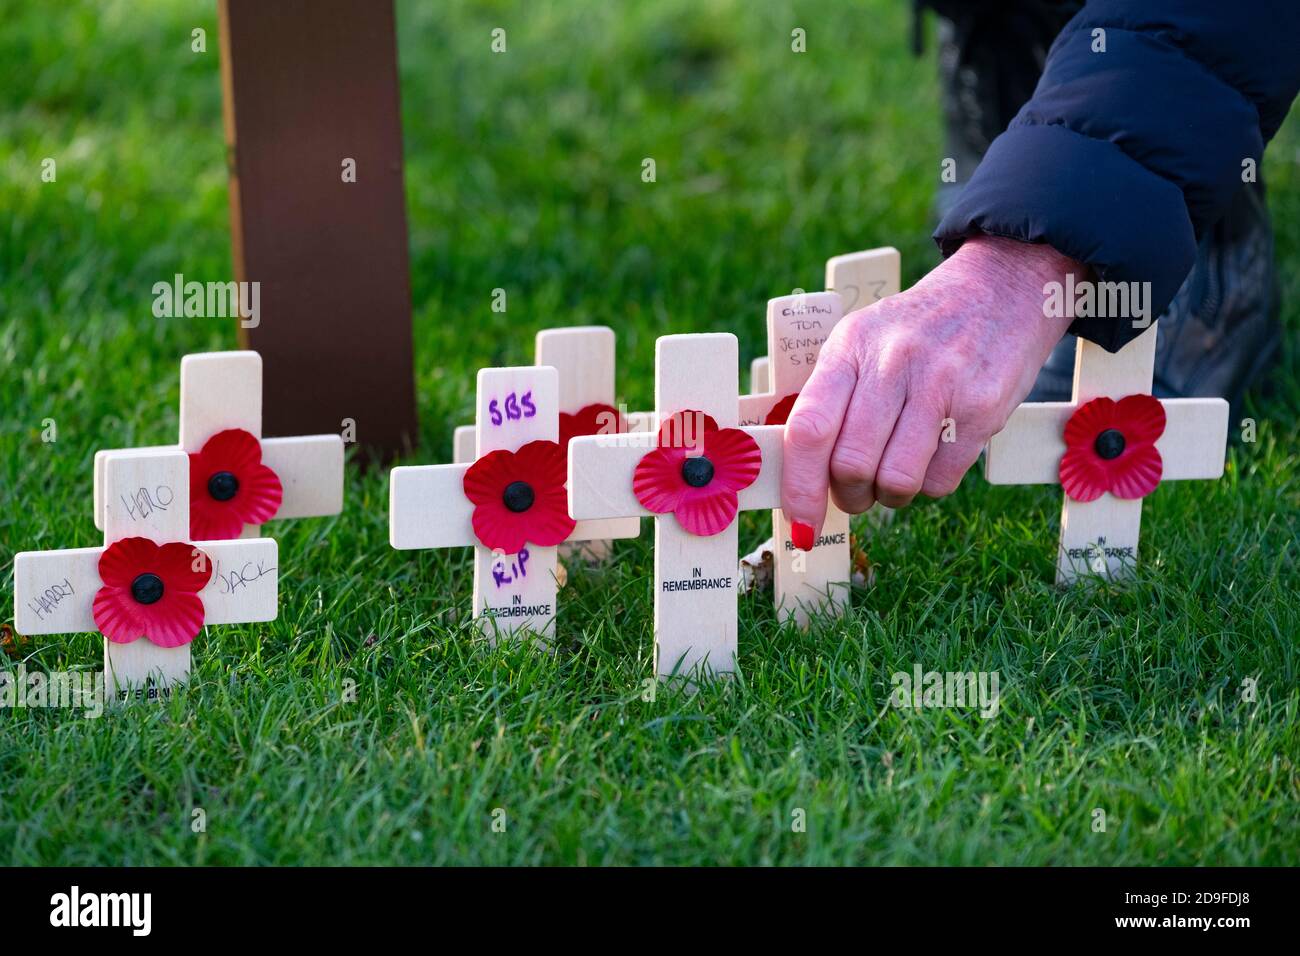 Edinburgh, Scotland, UK. 5 November 2020.  Members of the public pay their respects at garden of remembrance in Princes Street Gardens. Formal ceremonies have been cancelled because of Covid-19 on Remembrance Day. Iain Masterton/Alamy Live News Stock Photo